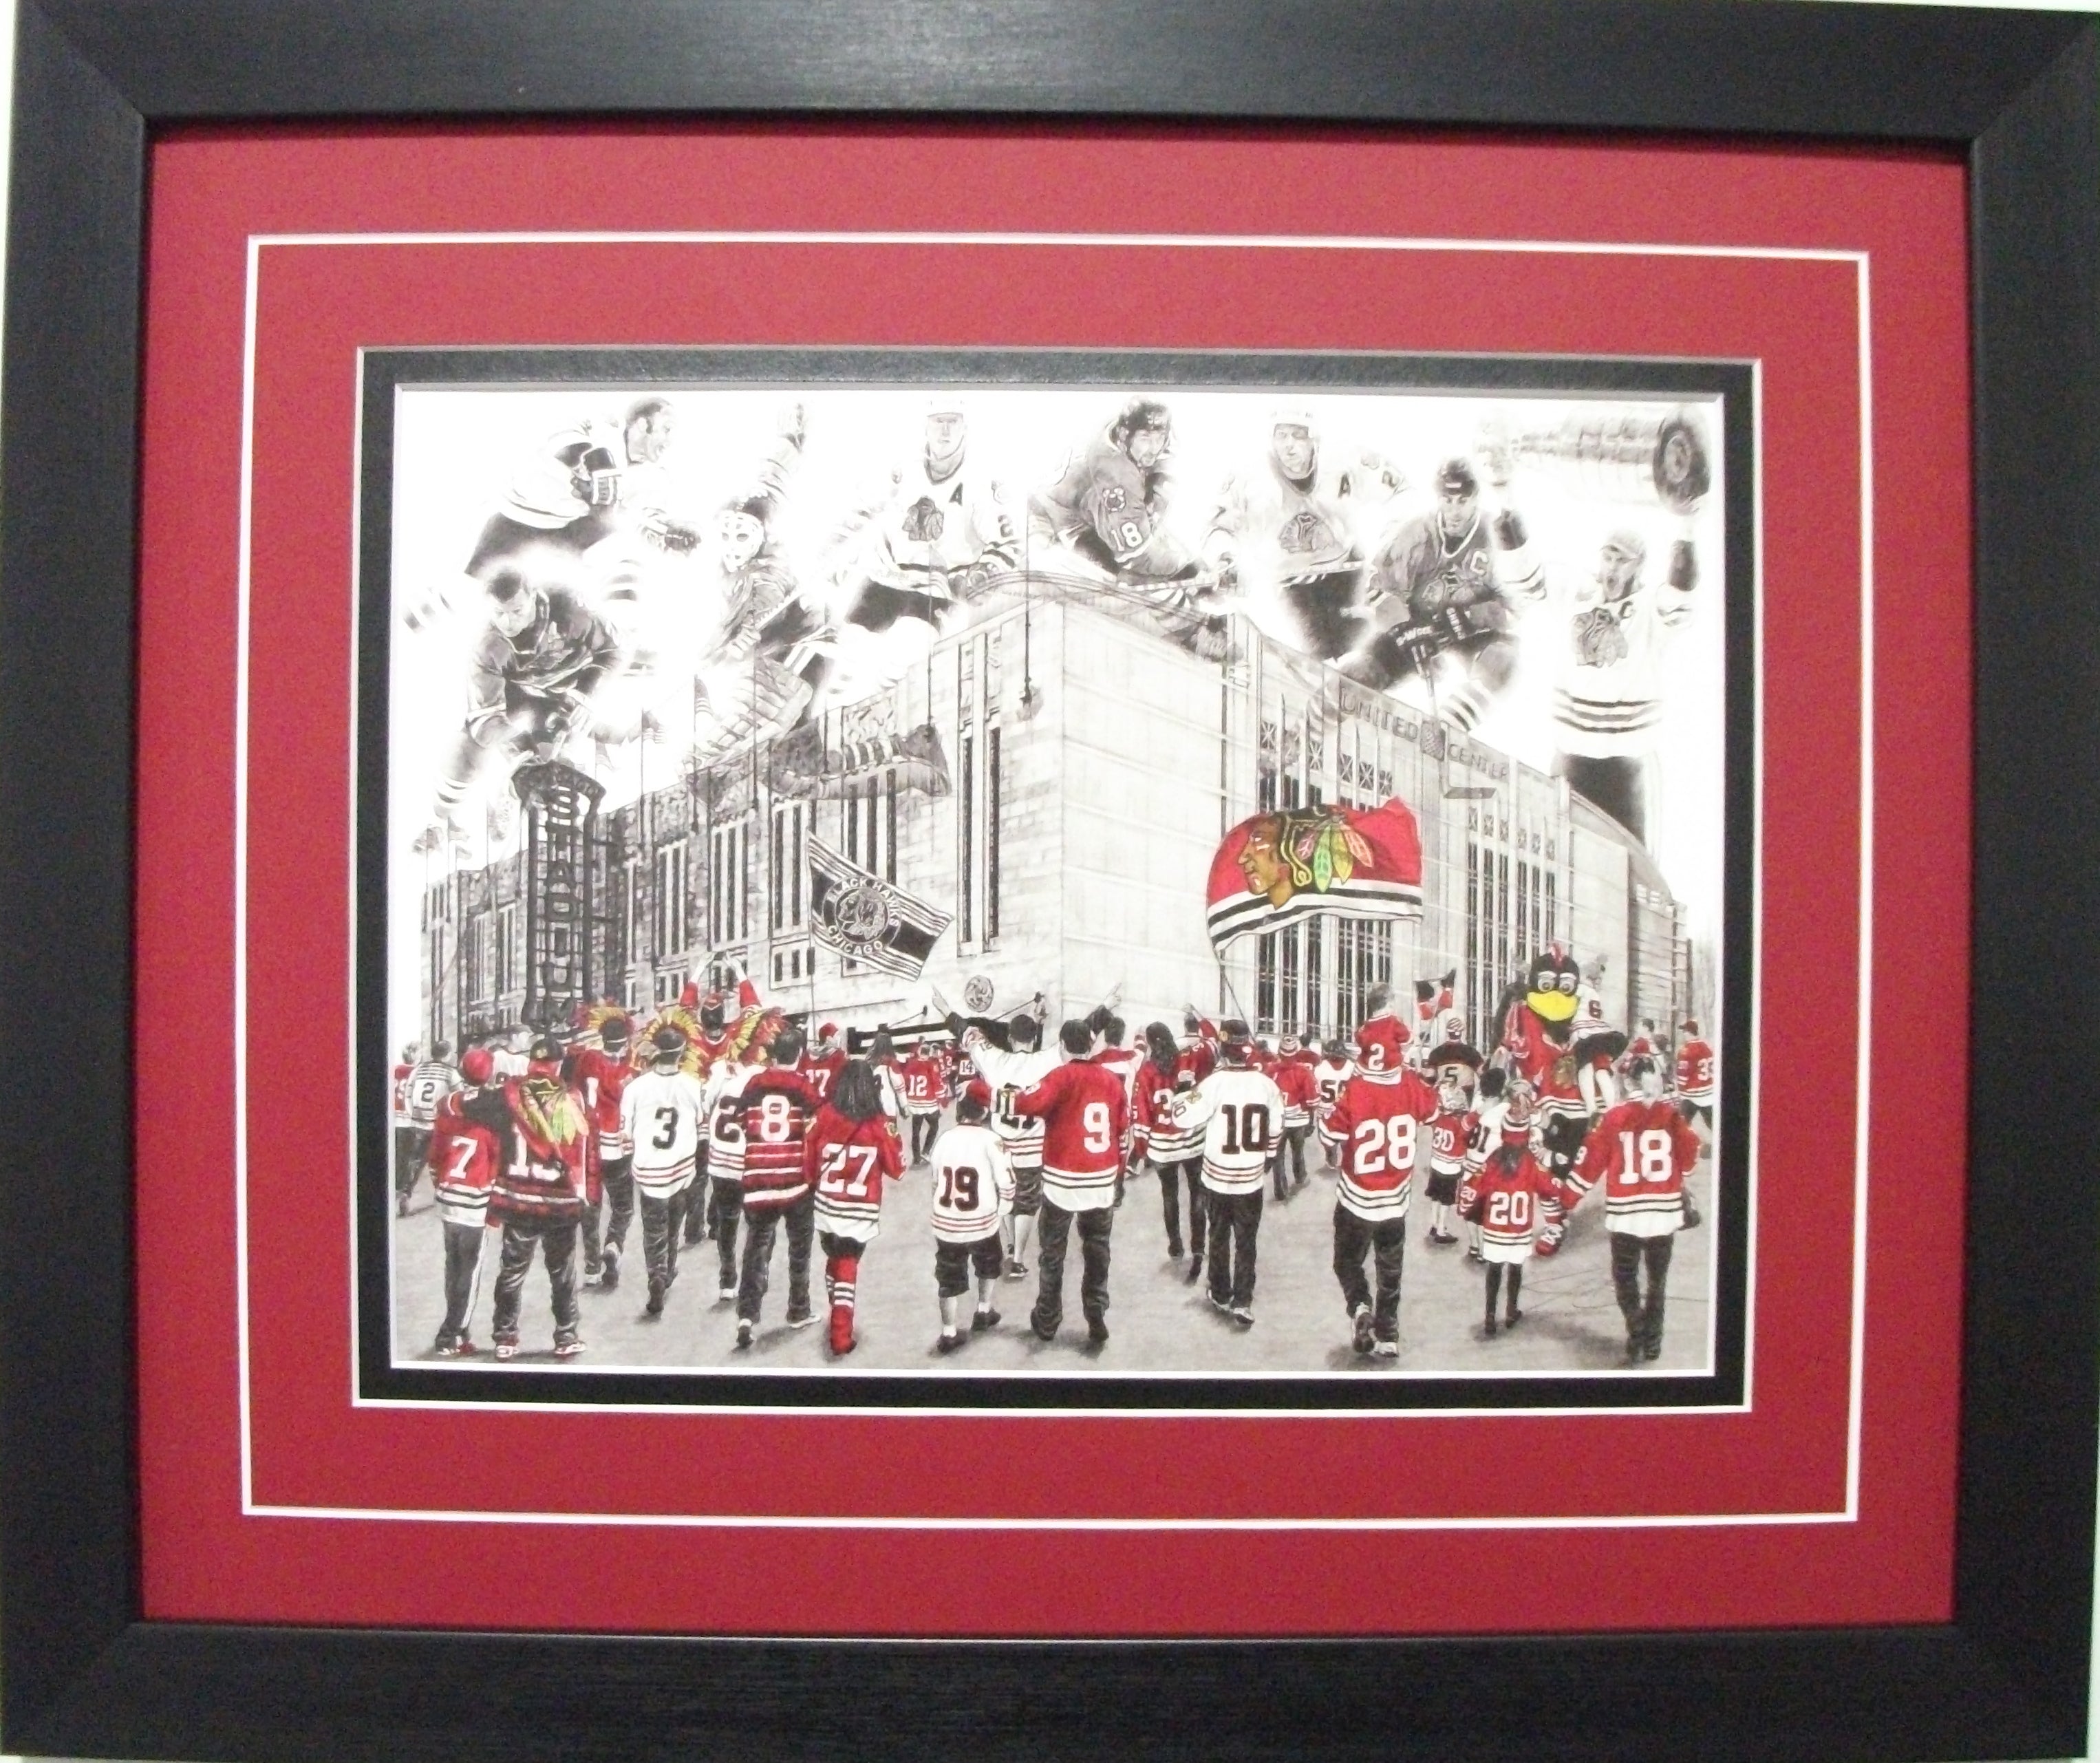 Chicago Black Hawks "Red Reign" Game Day Series by Jeremy Bresciani